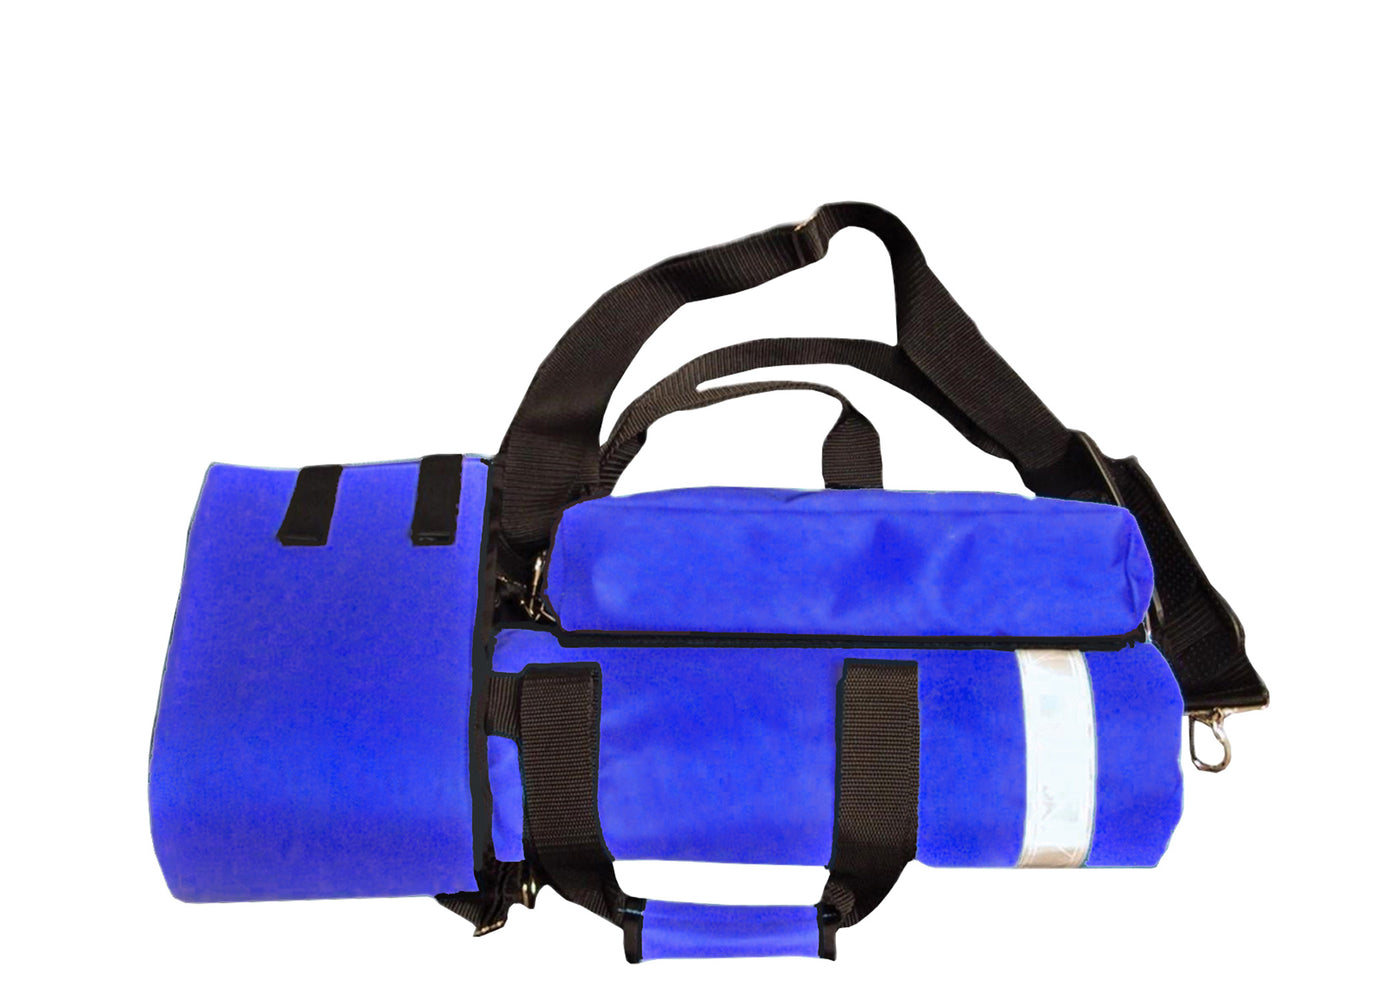 "D" Cylinder Oxygen Carry Bags (OXYC1022)